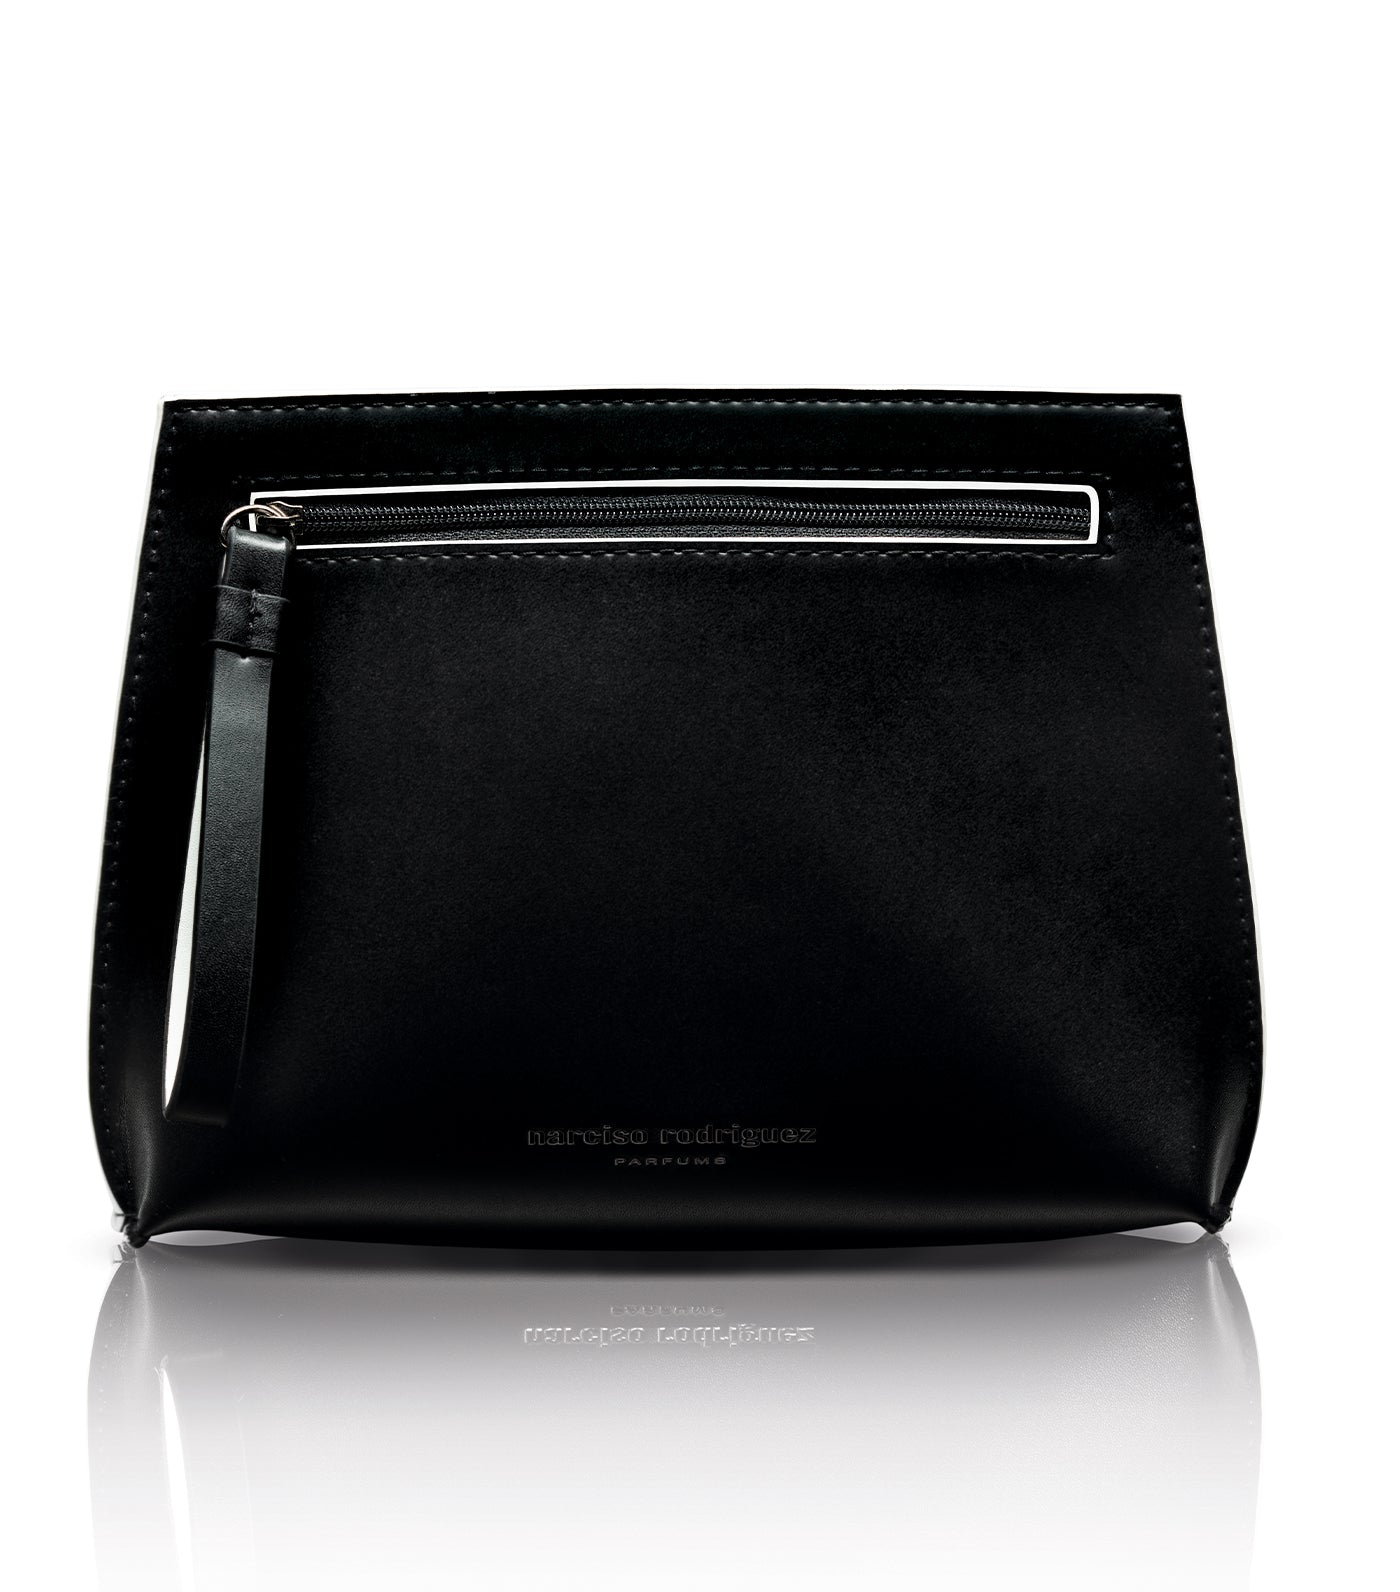 narciso rodriguez Free Large Black Clutch